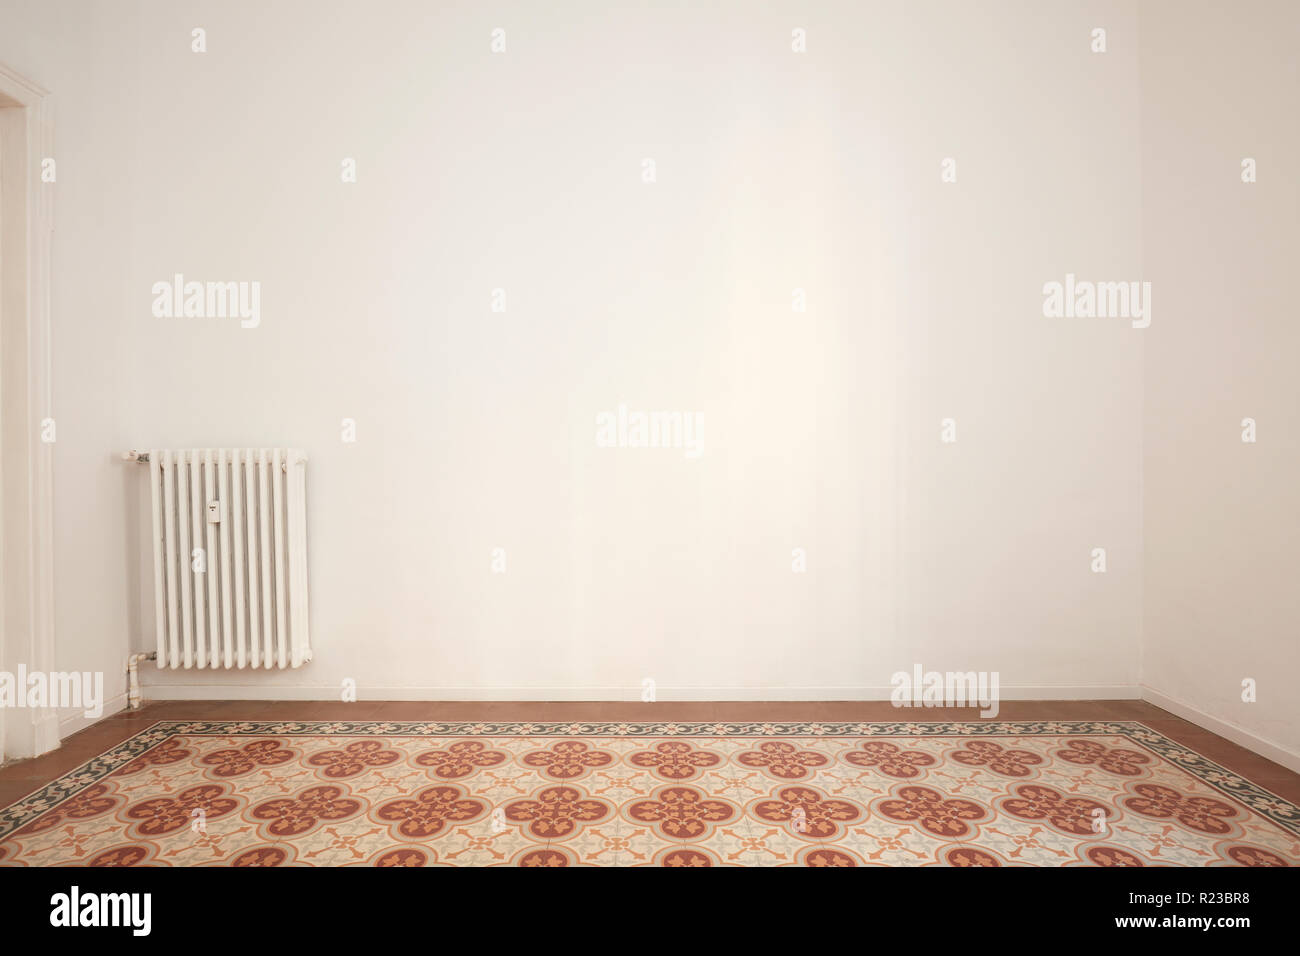 Blank, white wall and decorated floor in a renovated apartment Stock Photo